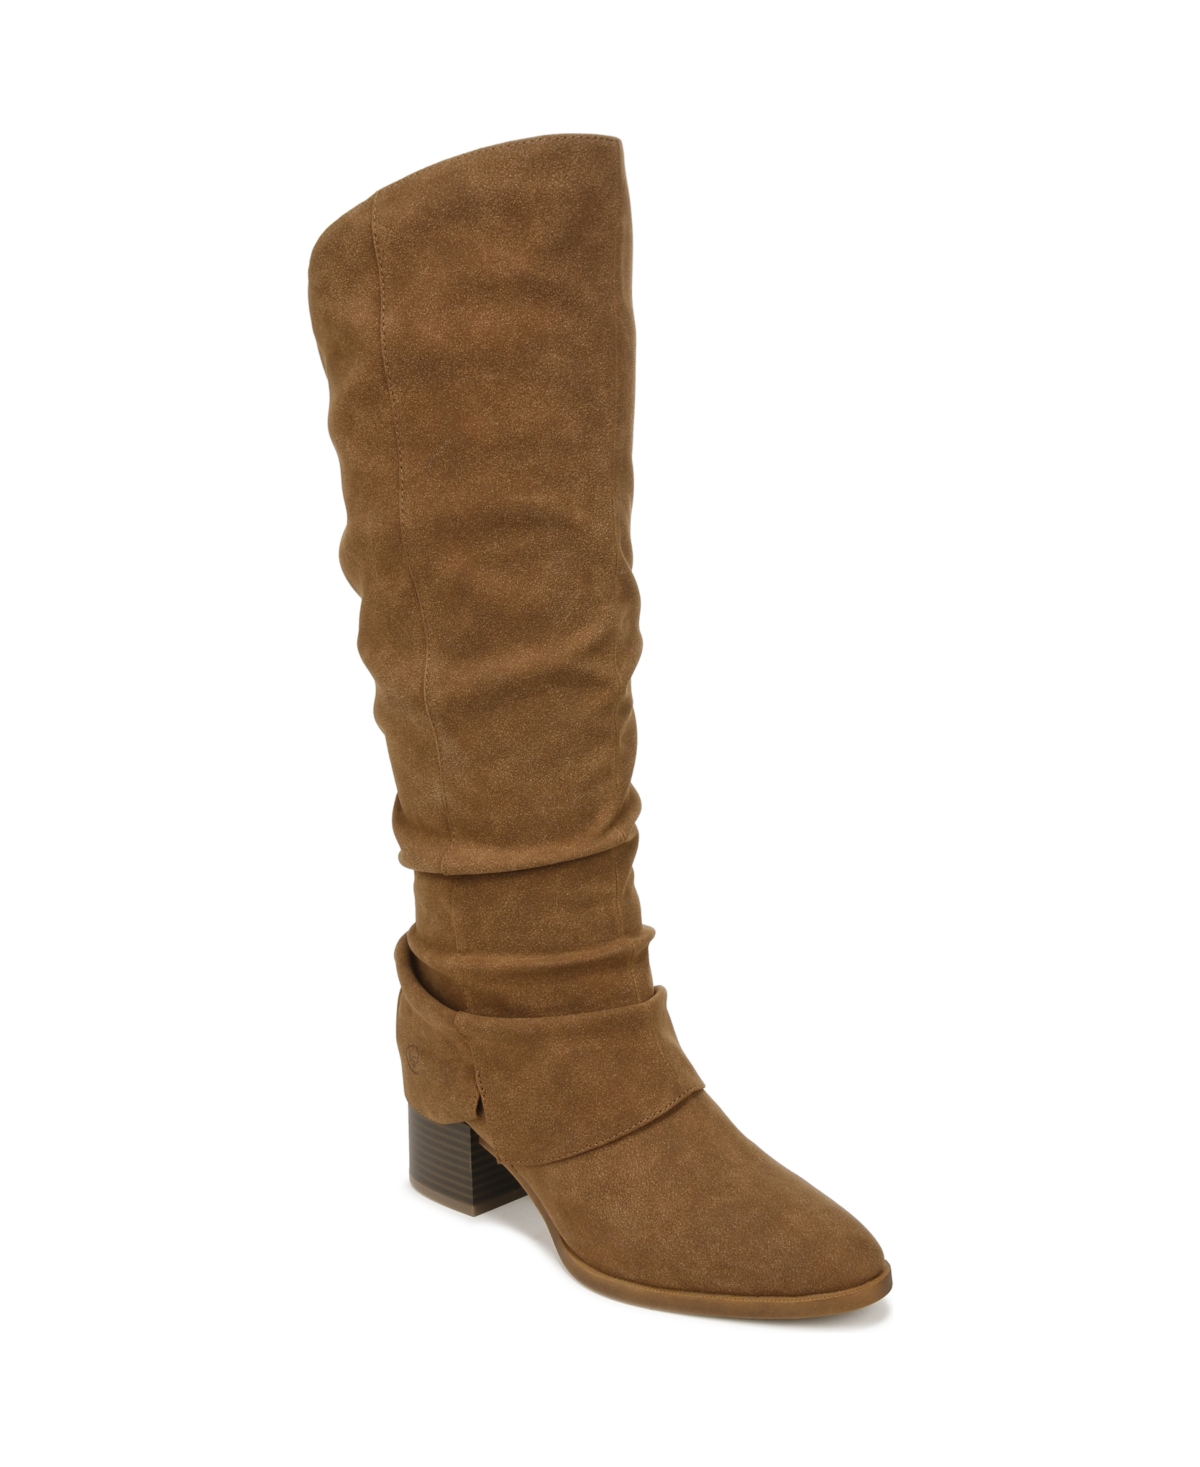 LIFESTRIDE DELILAH WIDE CALF TALL BOOTS